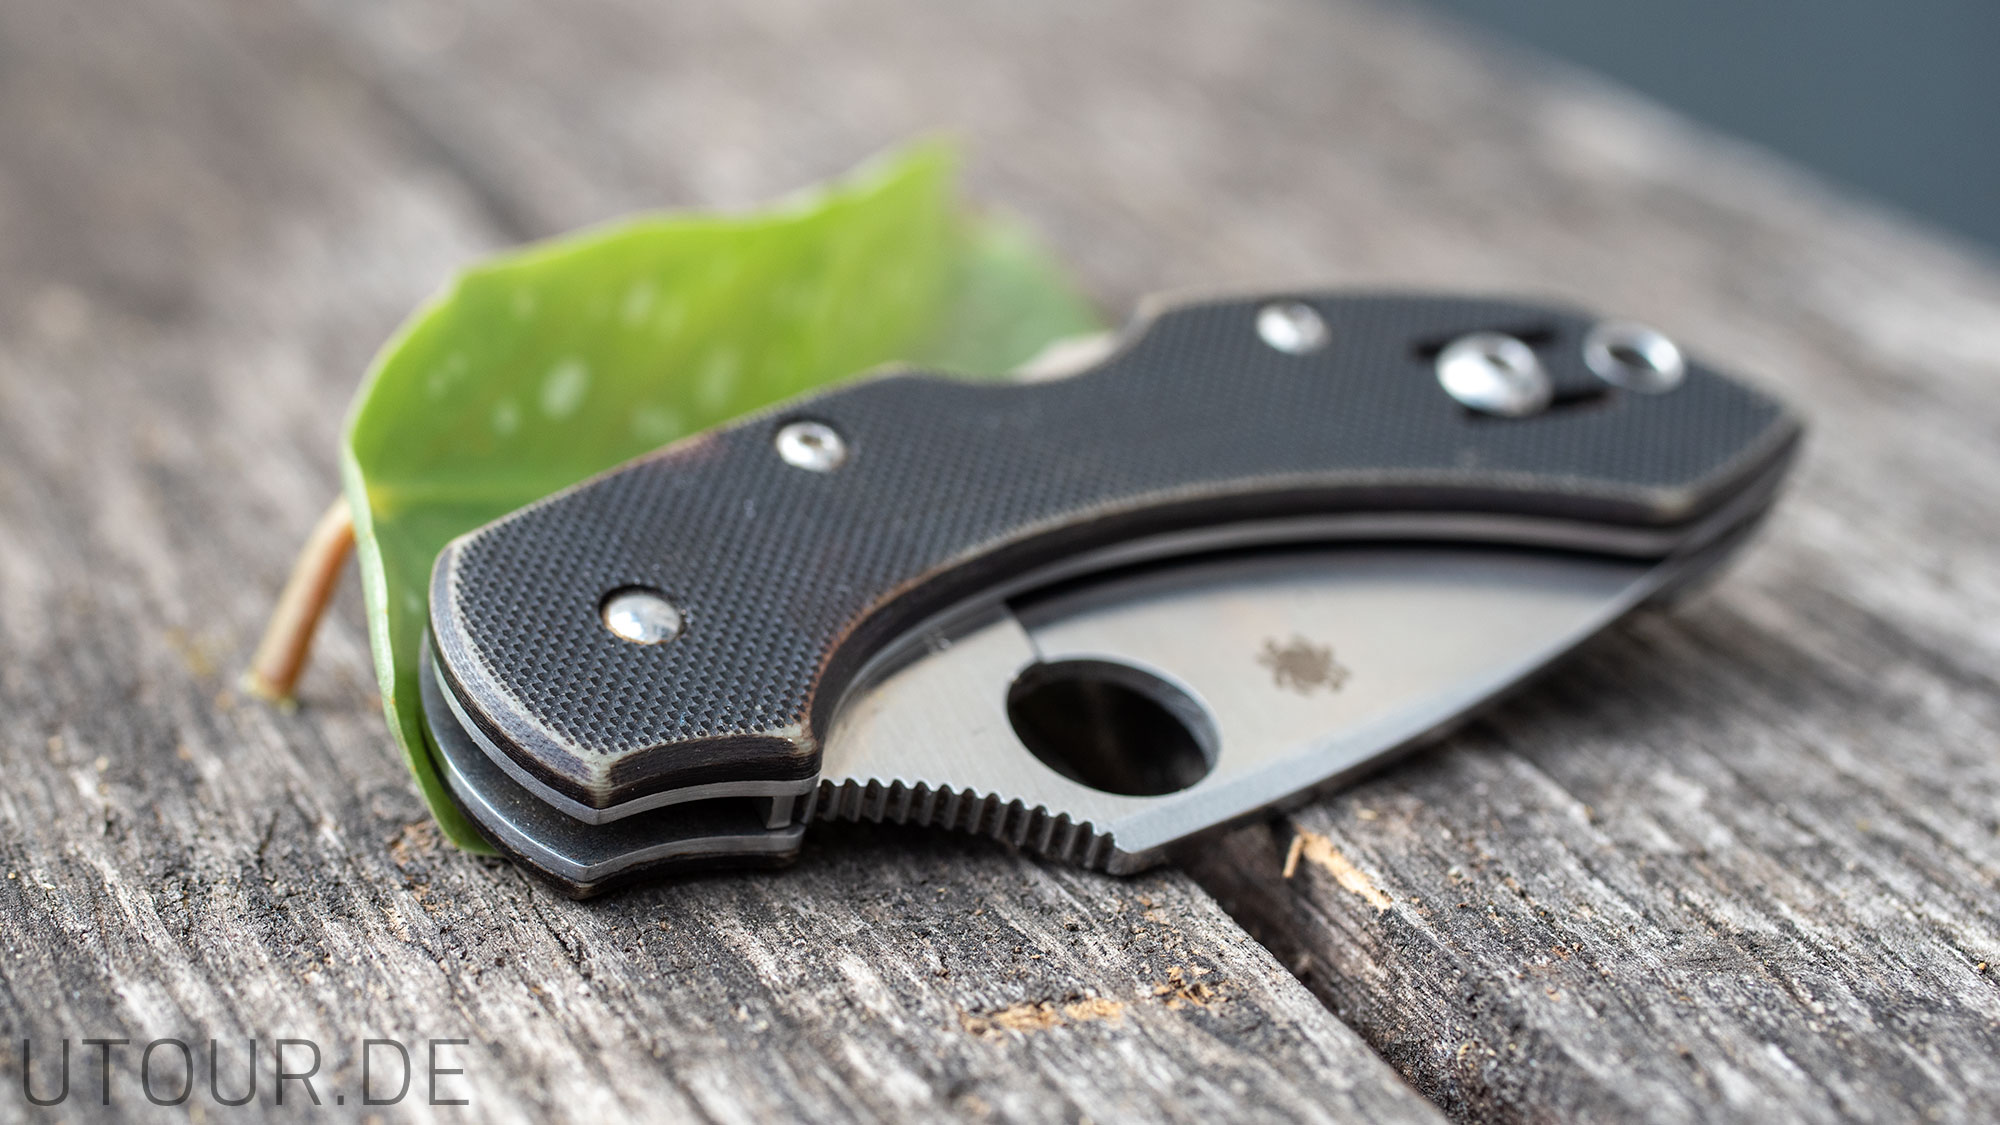 Review - How does Rit Dyed Spyderco FRN hold up?